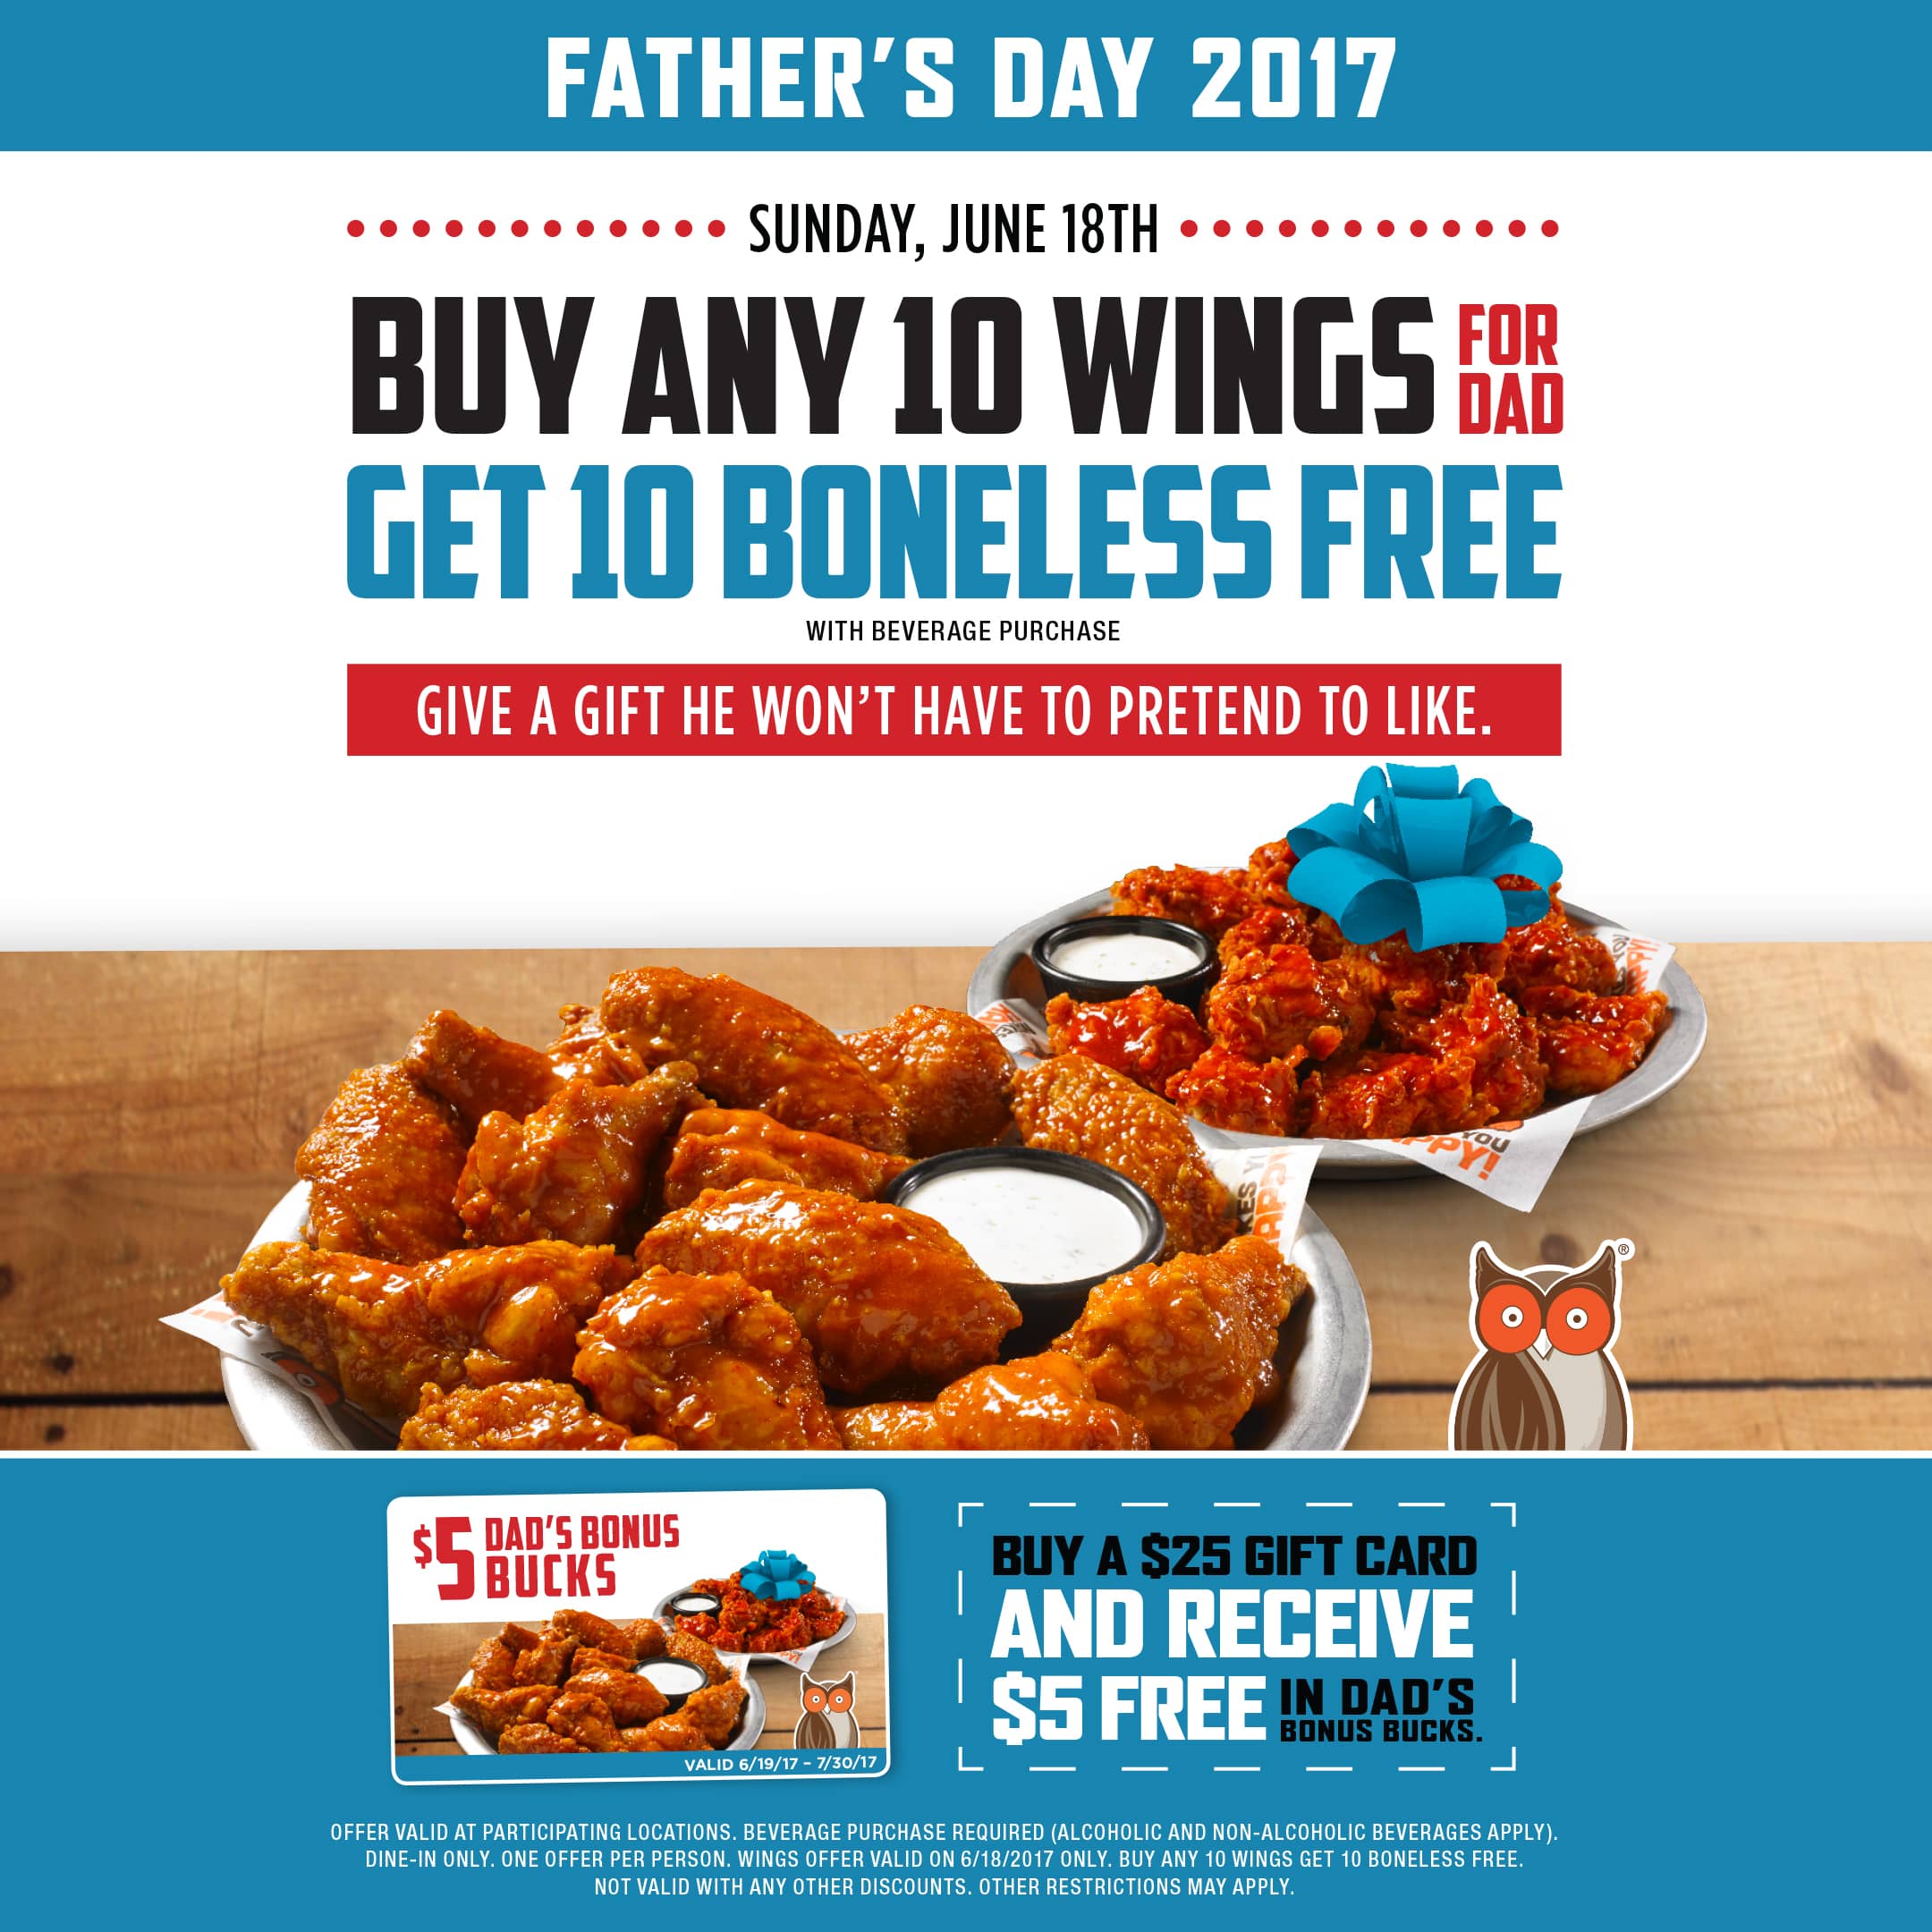 Free Wings for Dads at Hooters this Father’s Day Hooters